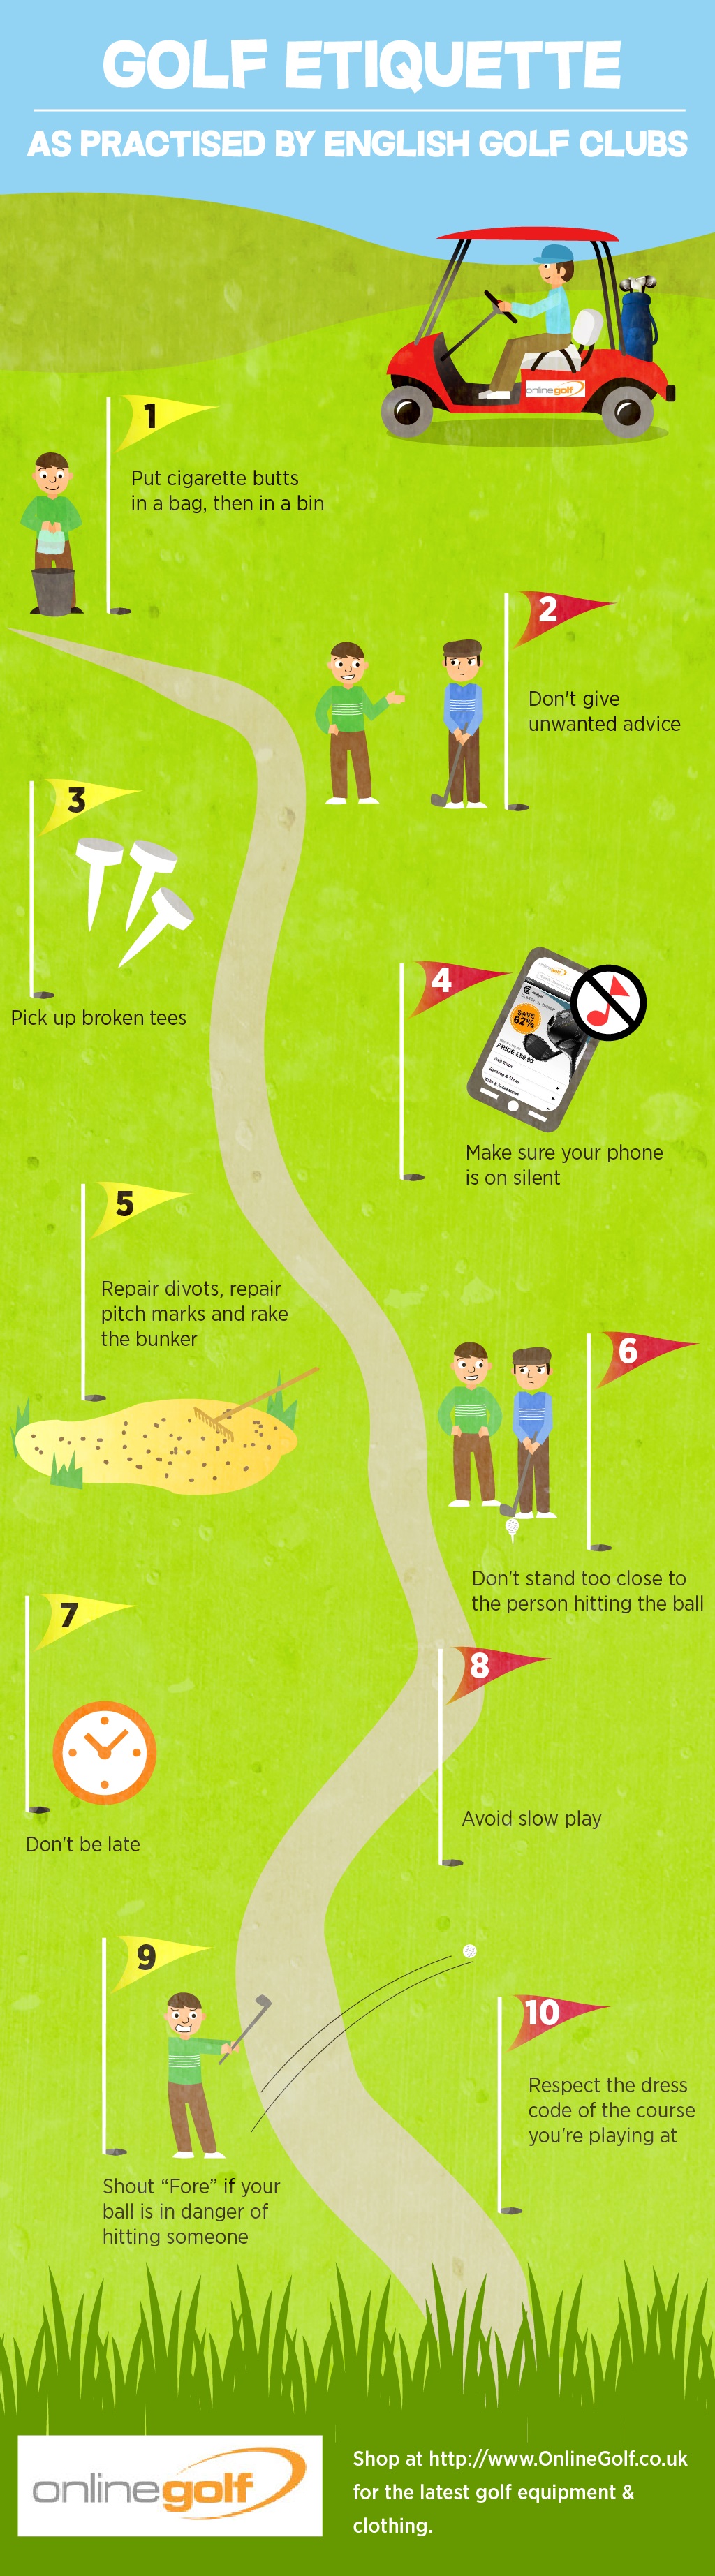 The Top 10 Tips On Good Golf Etiquette Infographic